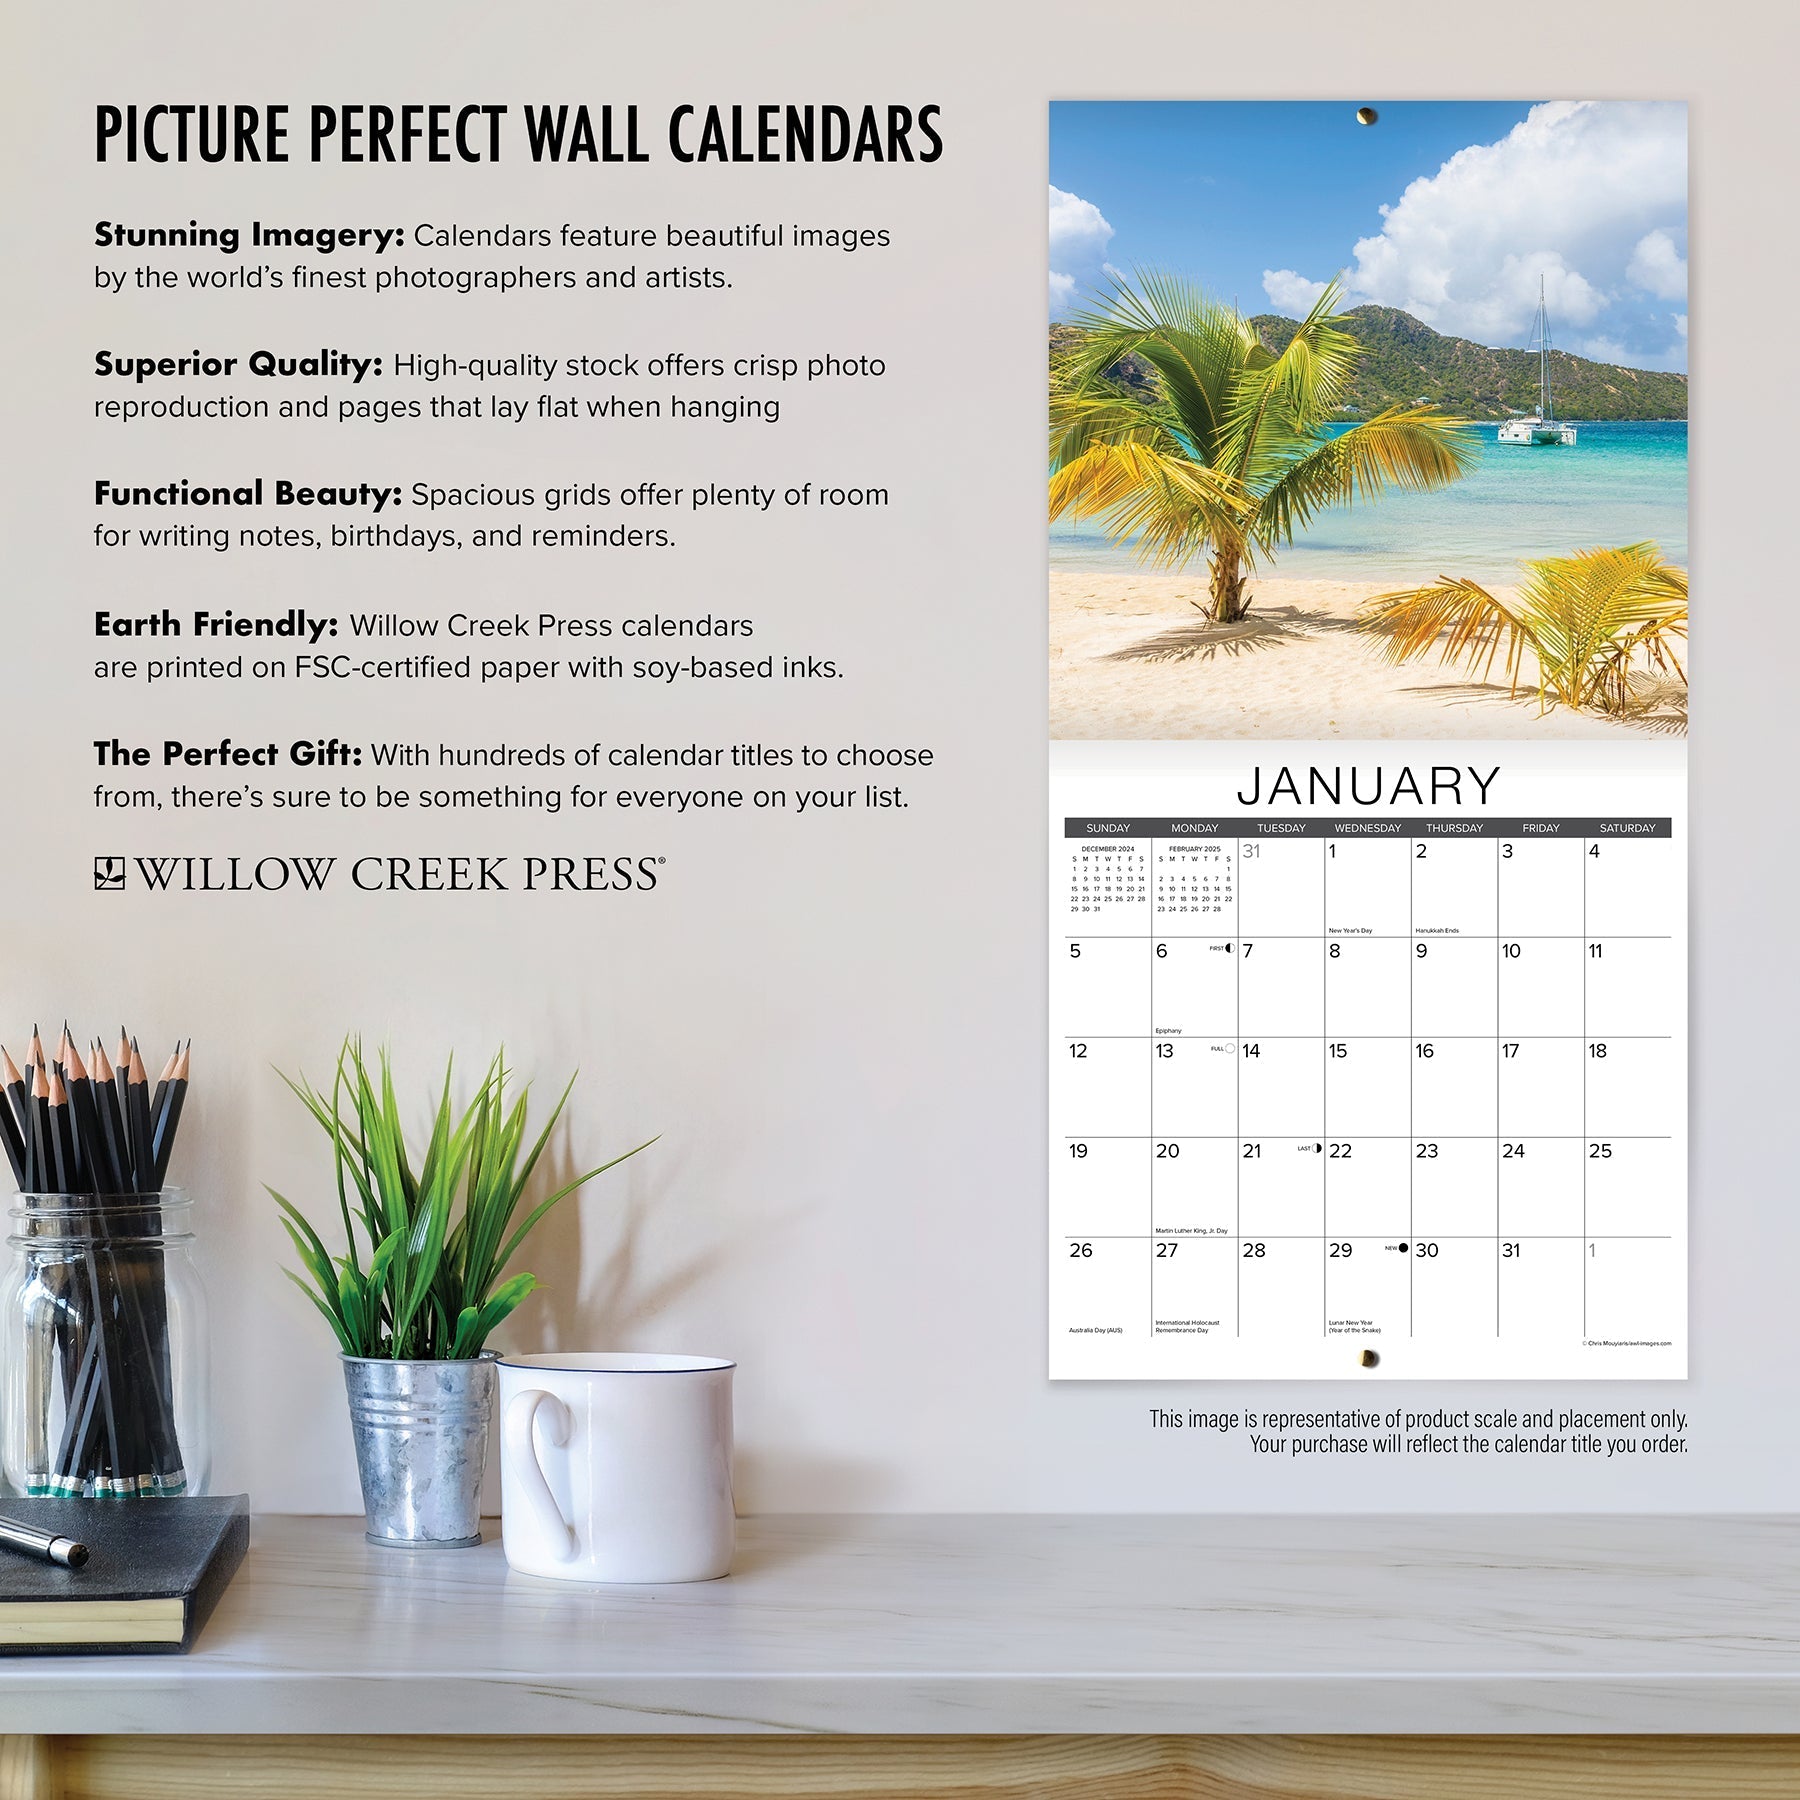 2025 Farms - Square Wall Calendar (US Only)